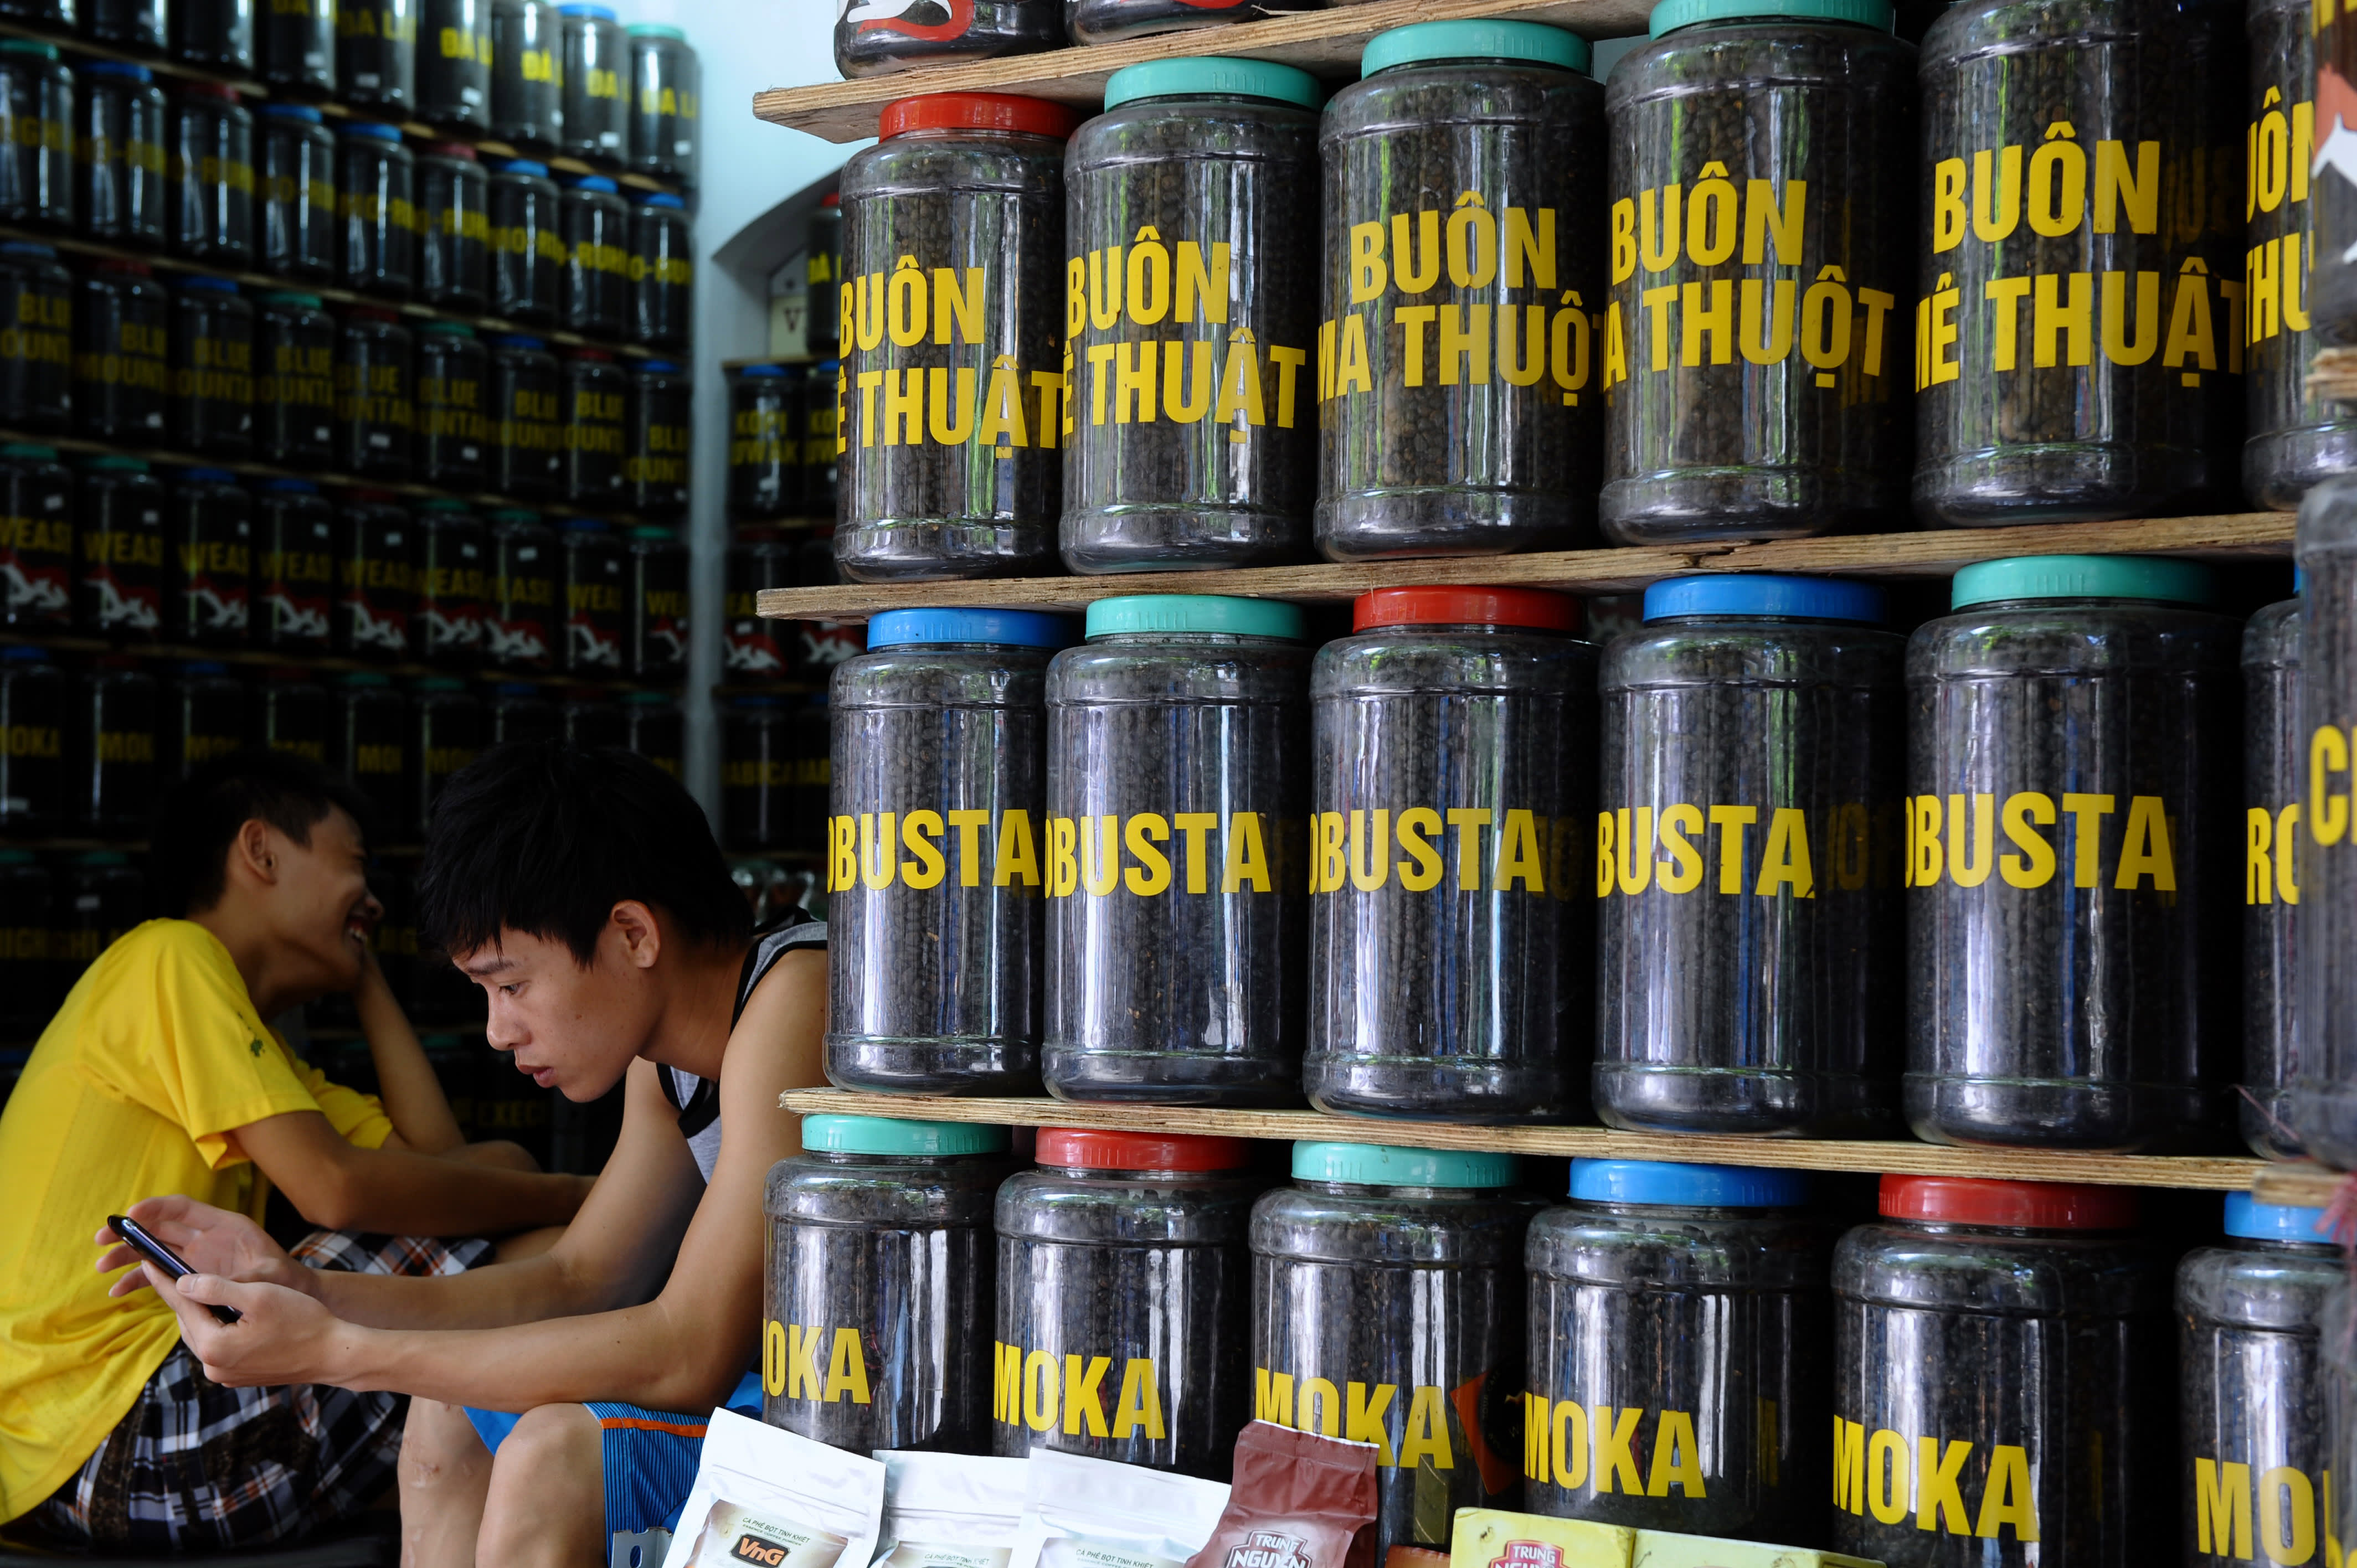 Pots of coffee bean are seen at a coffee shop in Hanoi, Vietnam on August 15, 2012. Vietnam is one of the world’s top coffee producers and exporters. Hoang Dinh Nam | AFP | Getty Images